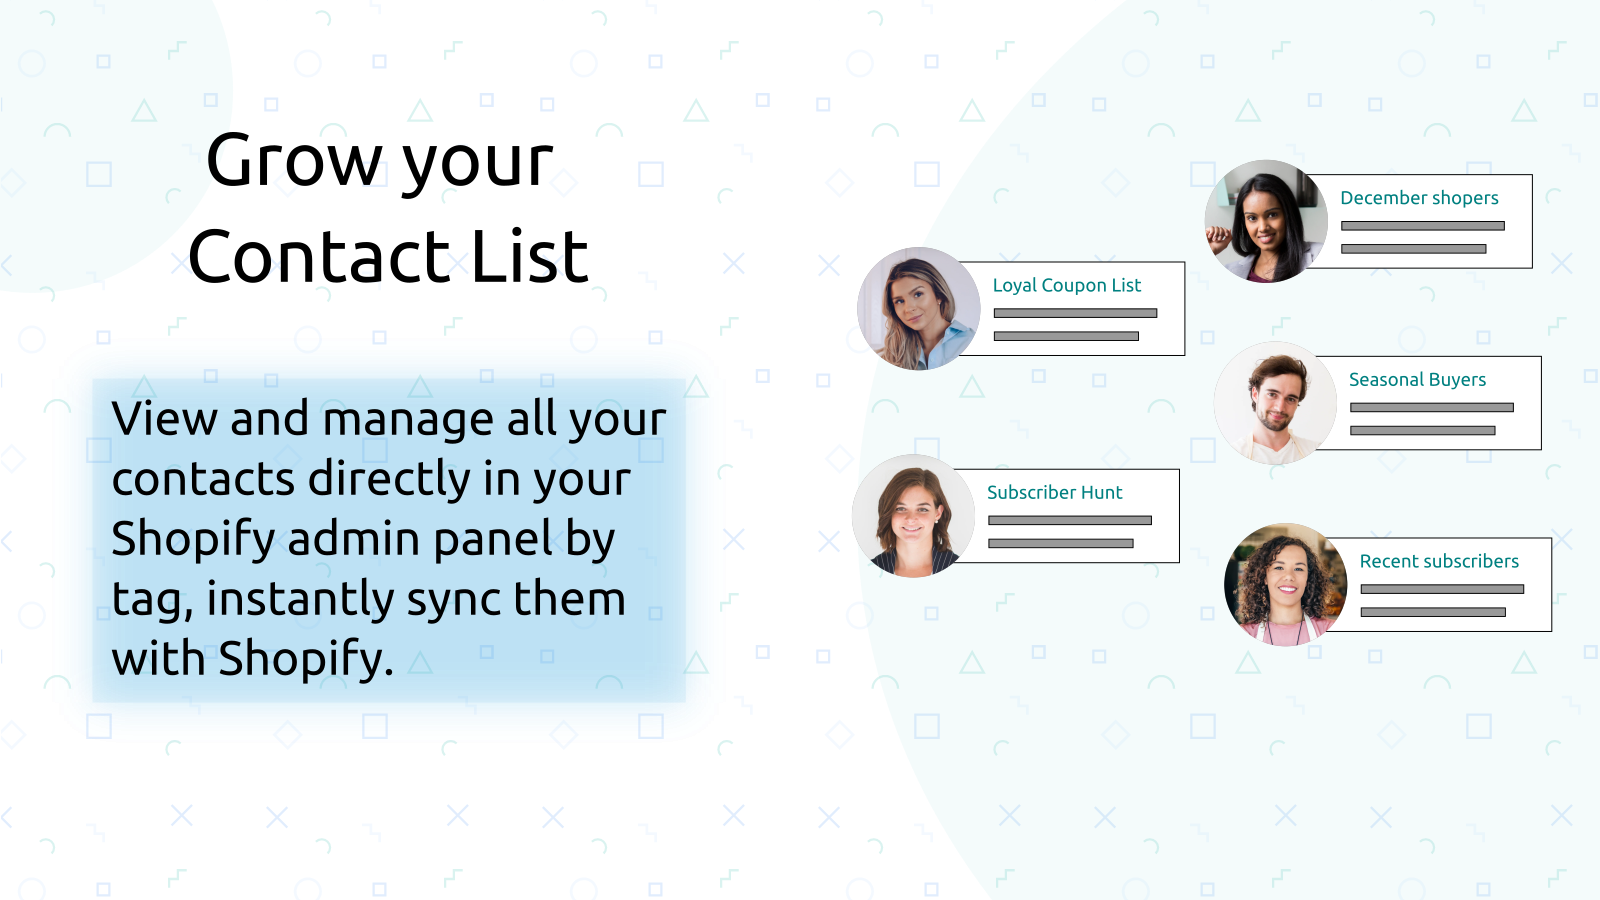 Grow your Contact List